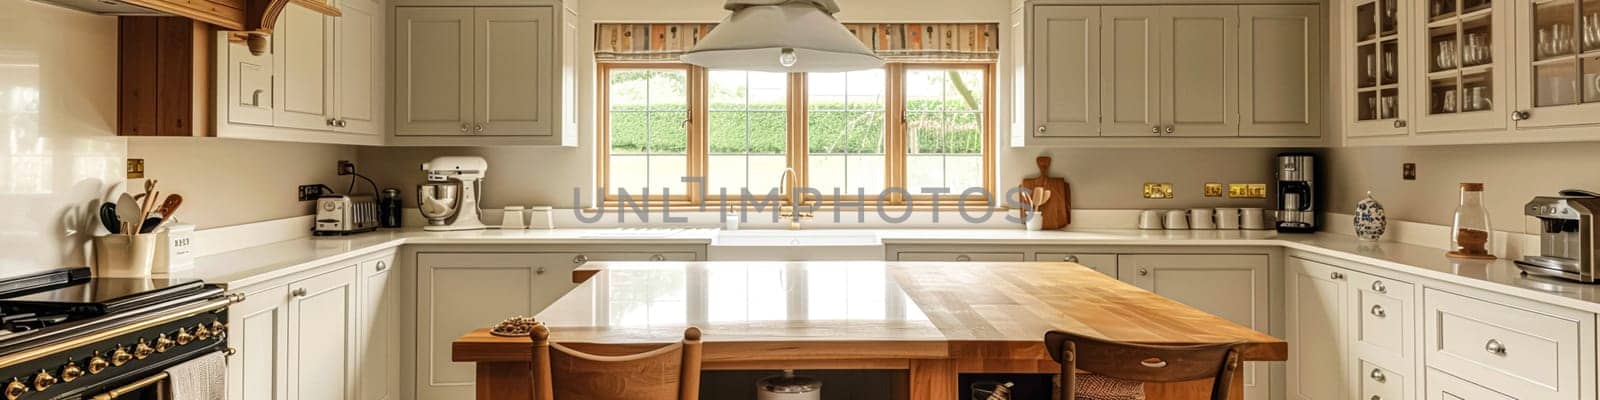 Bespoke kitchen design, country house and cottage interior design, English countryside style renovation and home decor idea banner